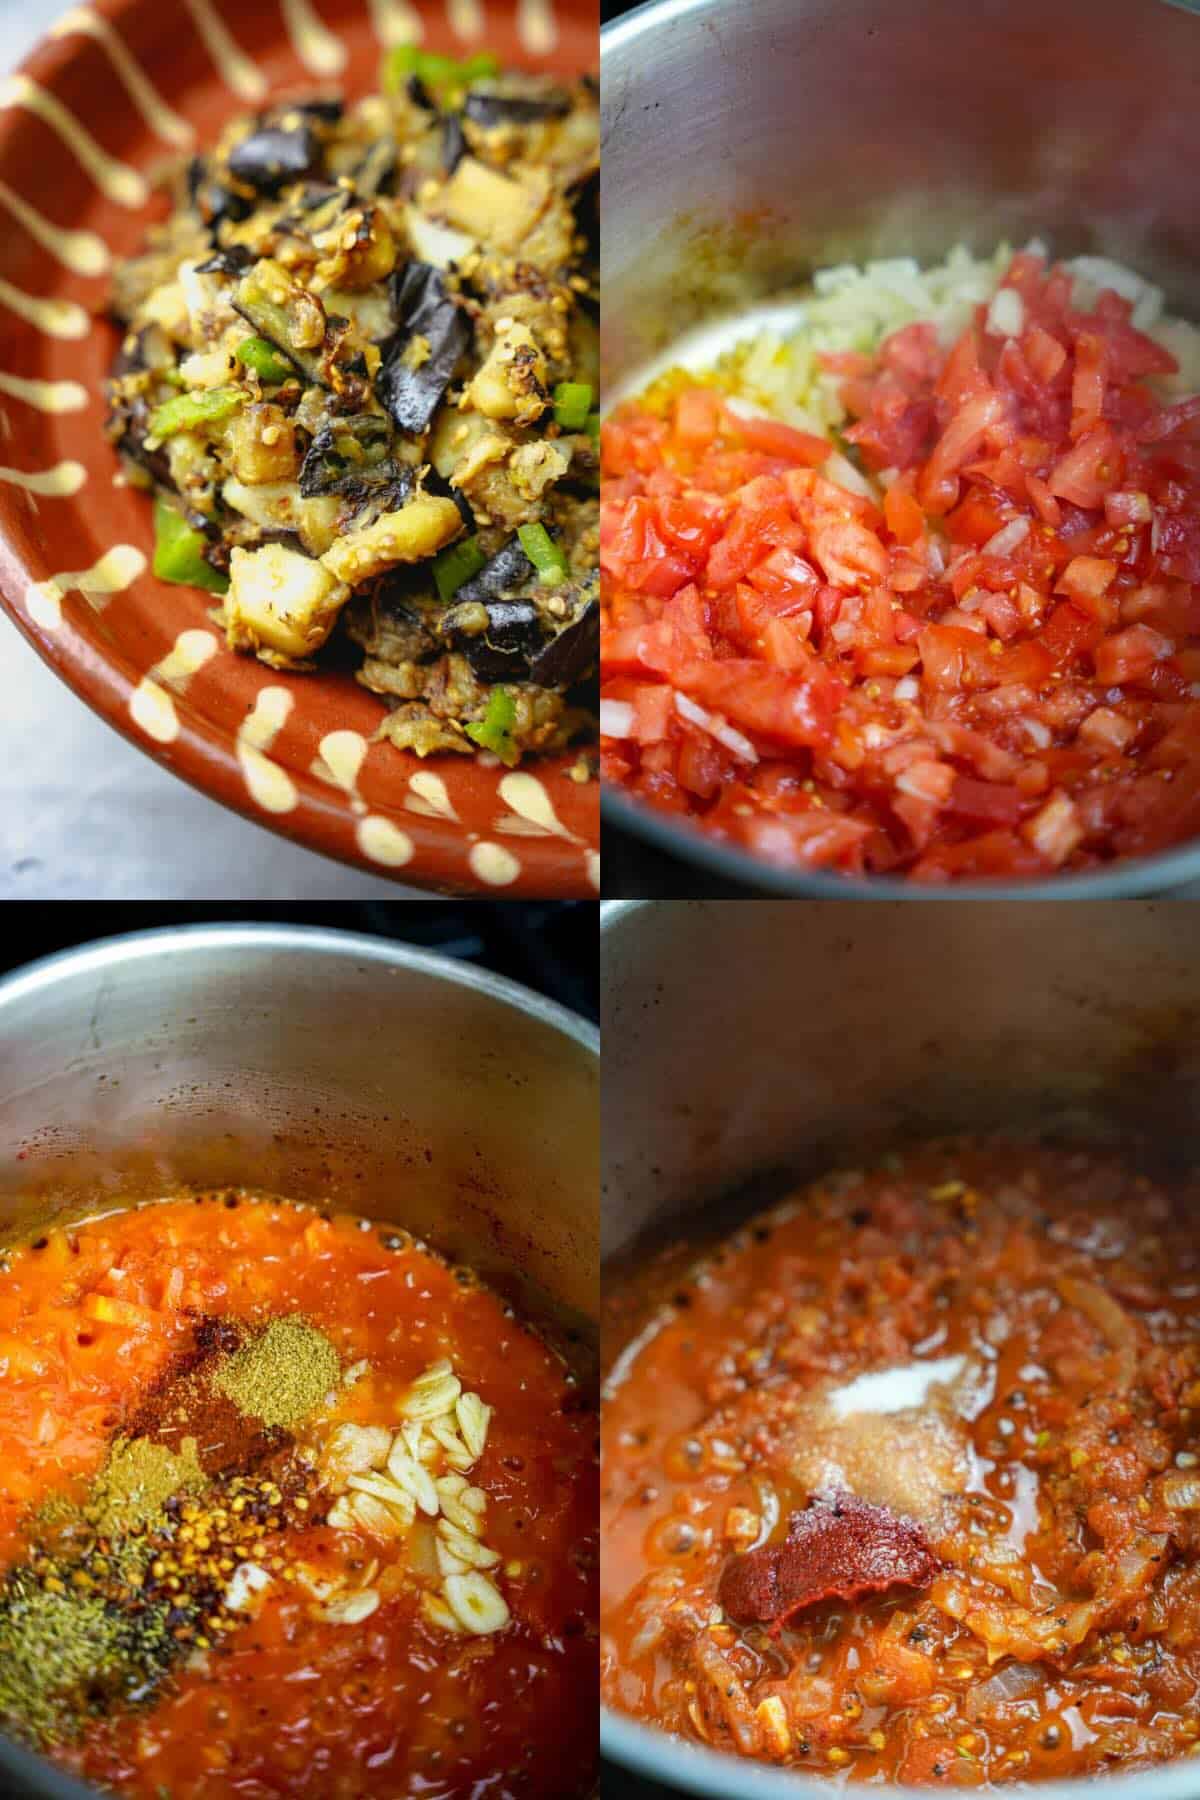 A series of photos showing the process of making Şakşuka tomato sauce.